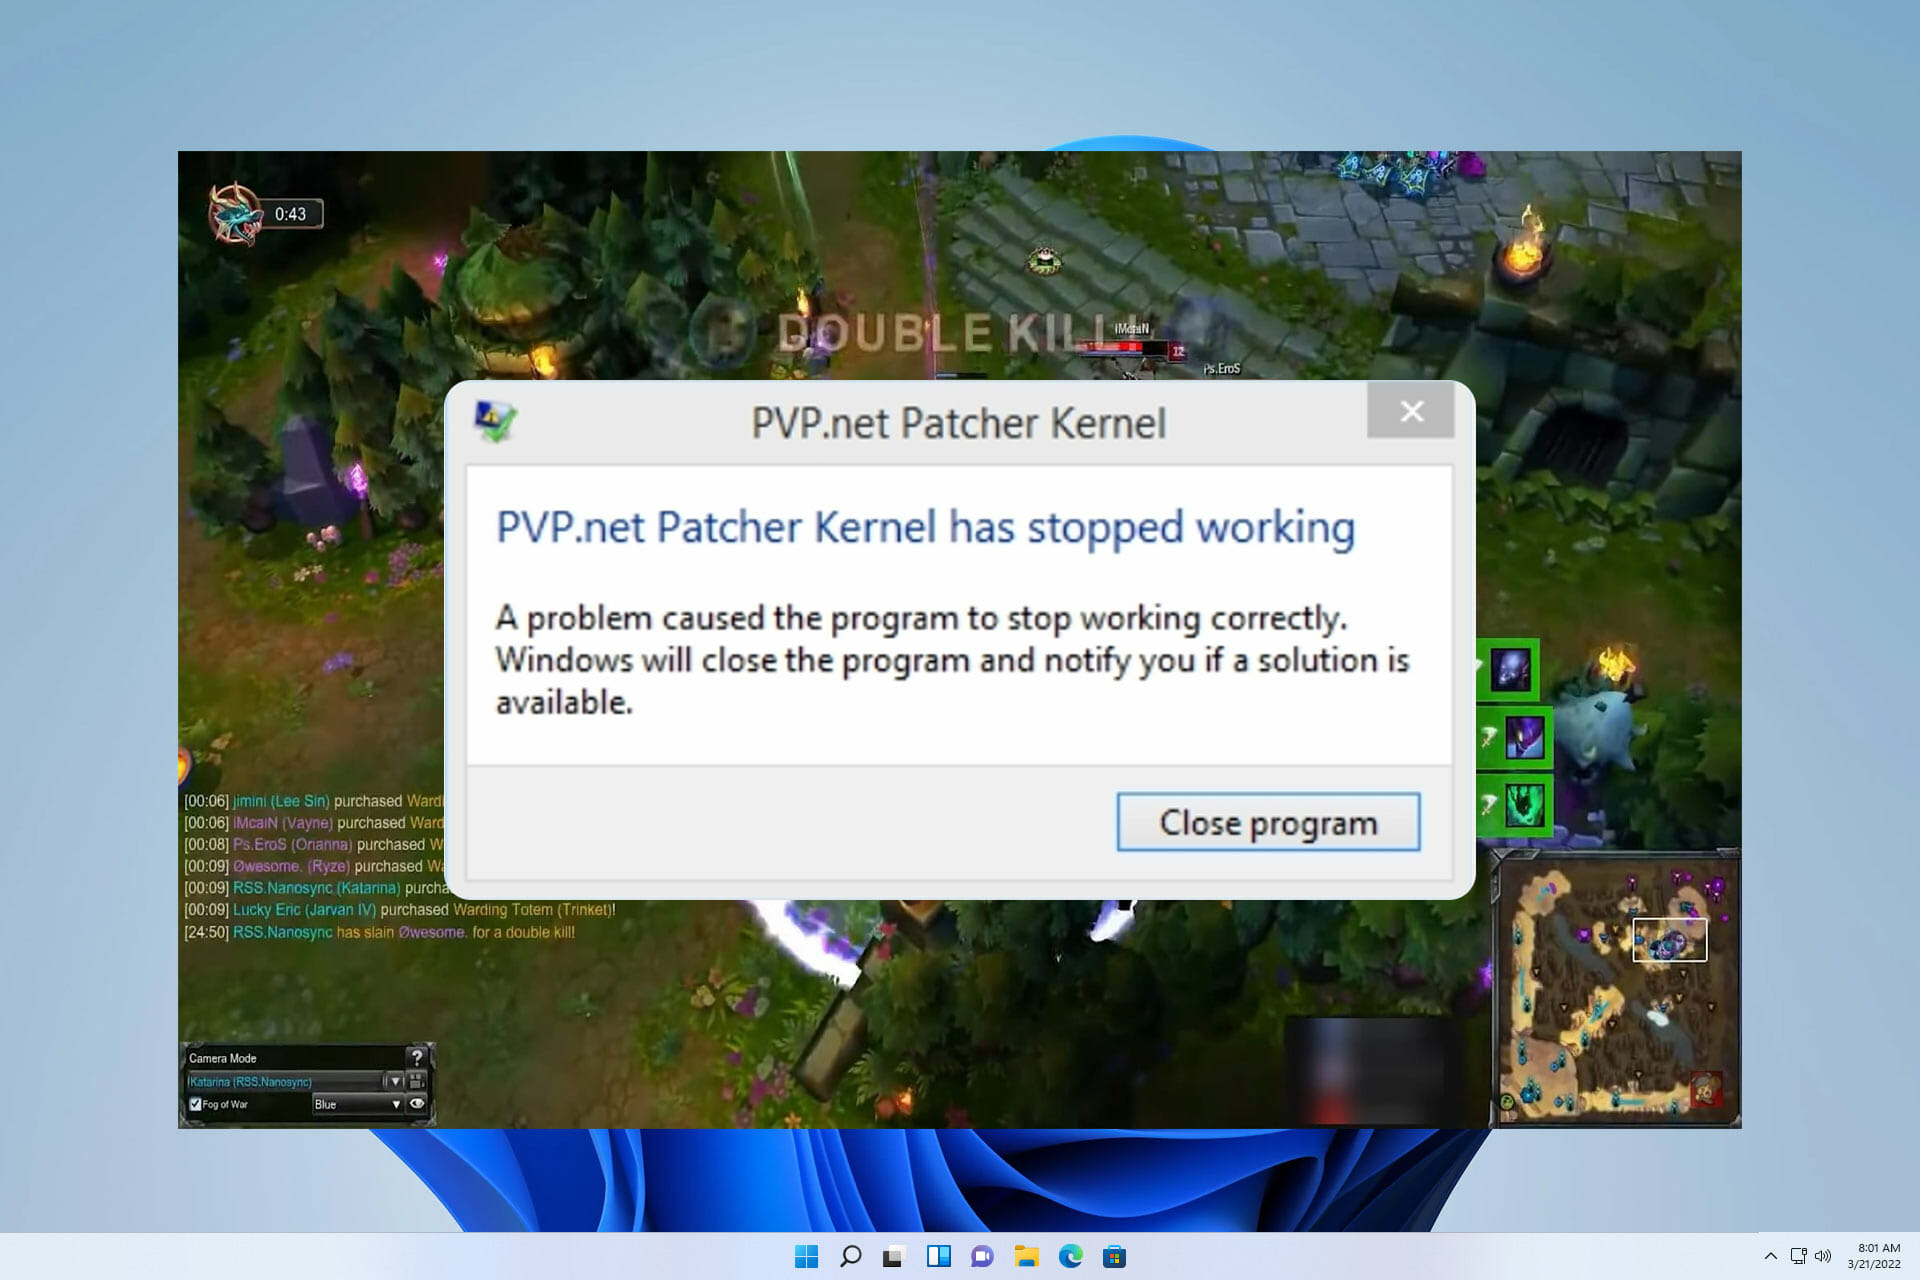 PVP.net patcher kernel has stopped working